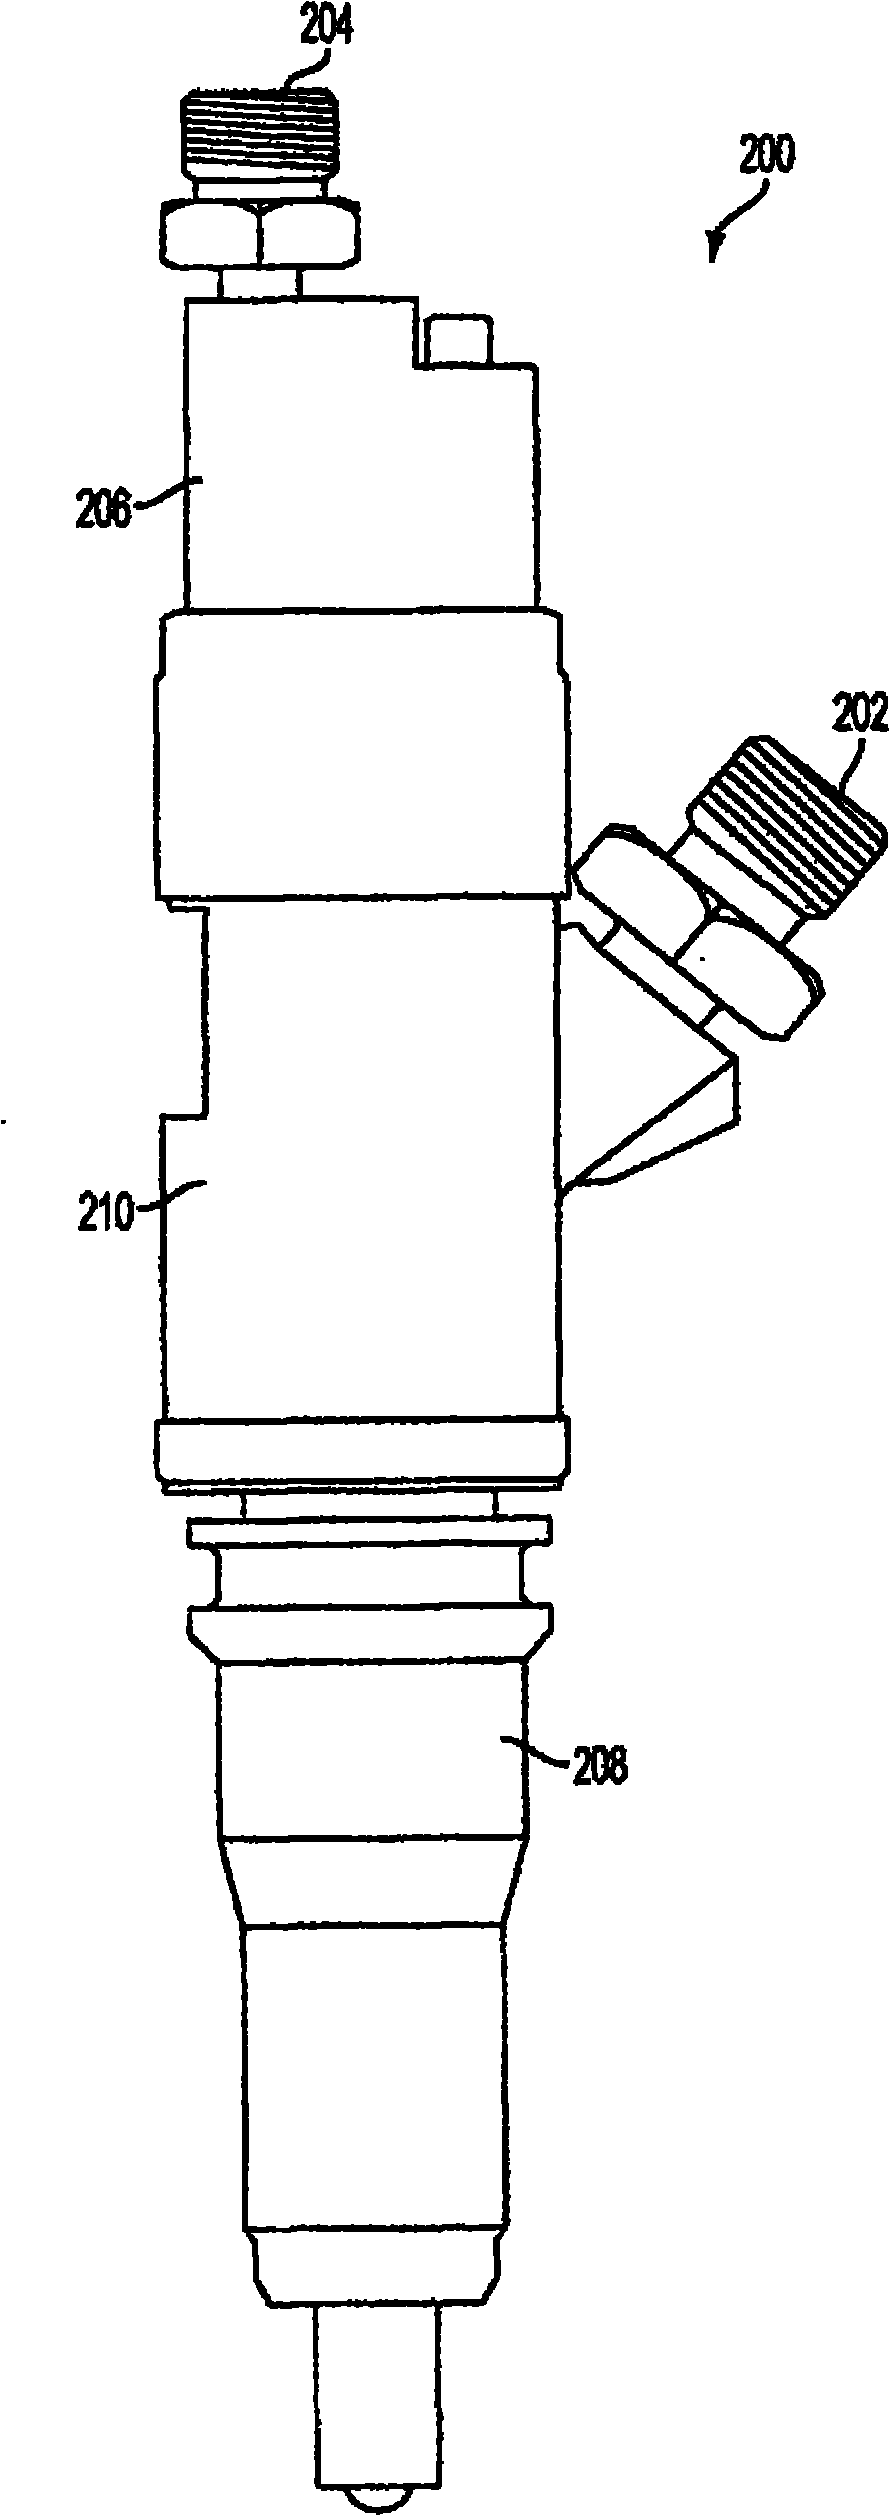 System and method for internal cooling of a fuel injector